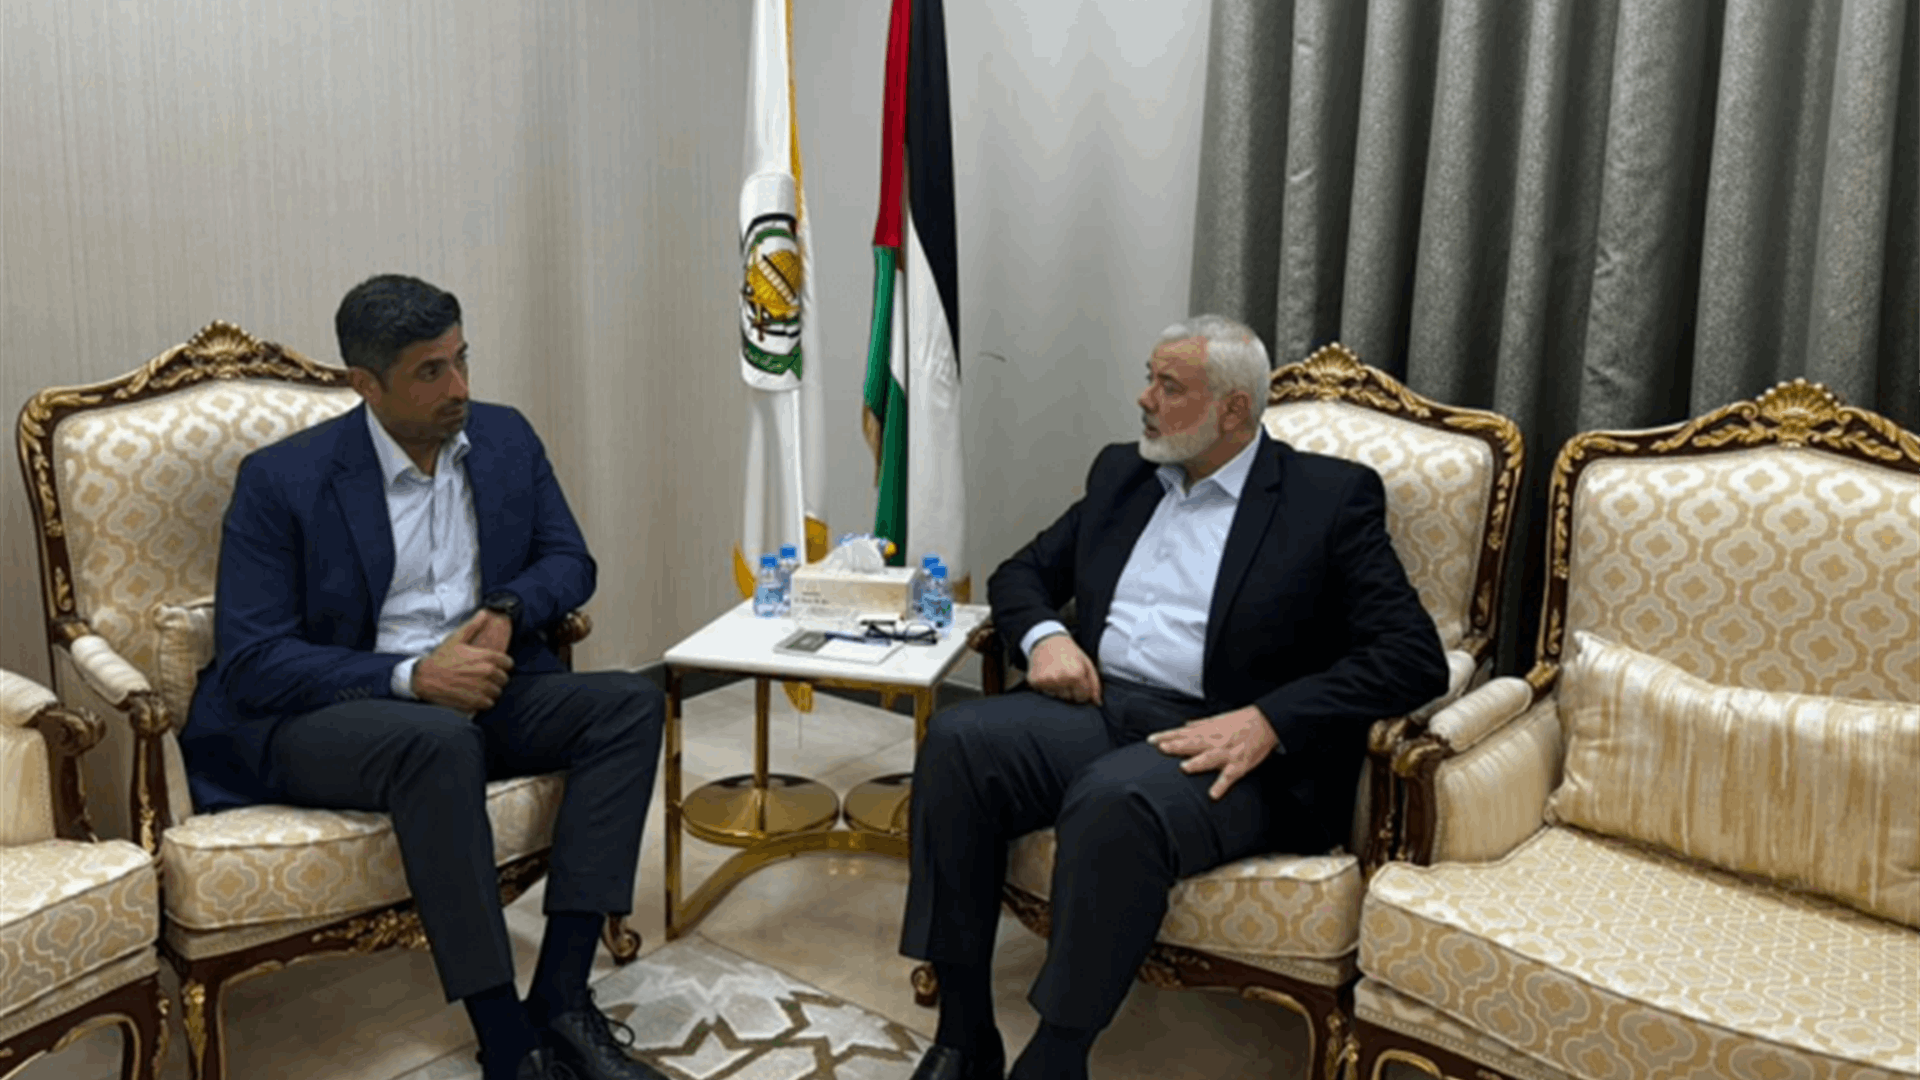 Haniyeh denies suspension of negotiations, affirms commitment to ceasefire efforts